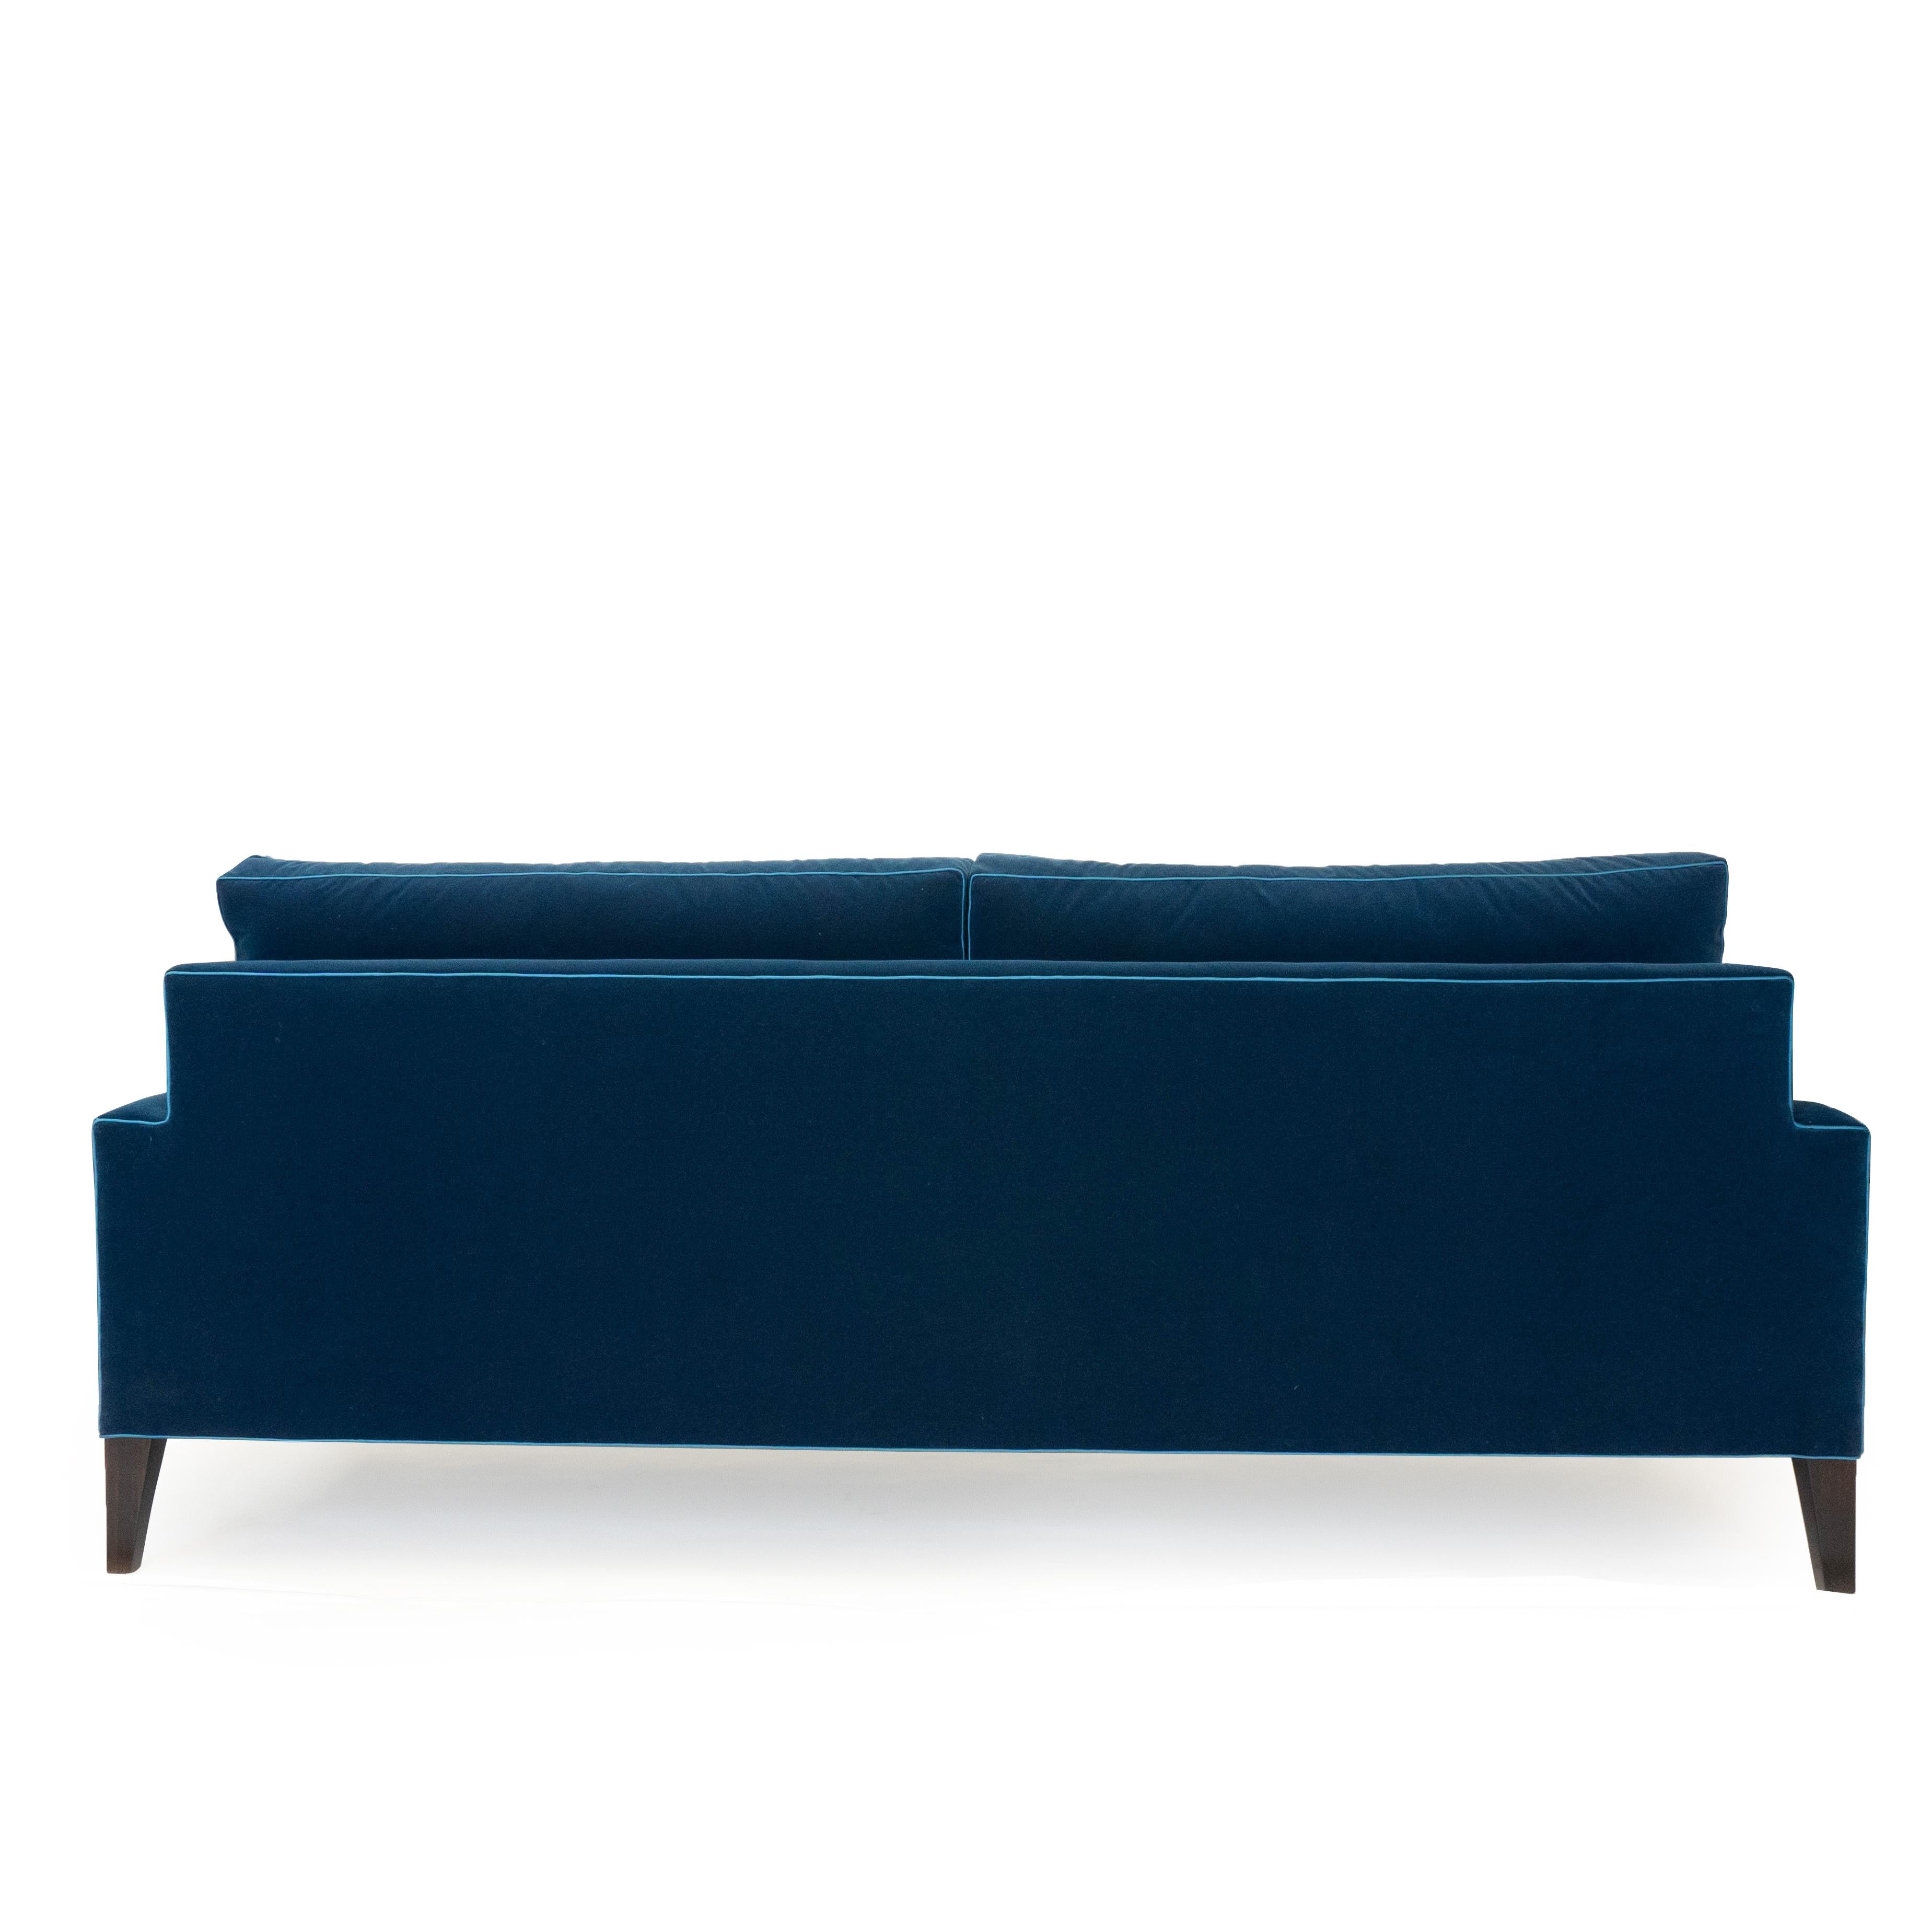 Modern Two Cushion Sofa in Dark Blue Velvet In Excellent Condition For Sale In Greenwich, CT